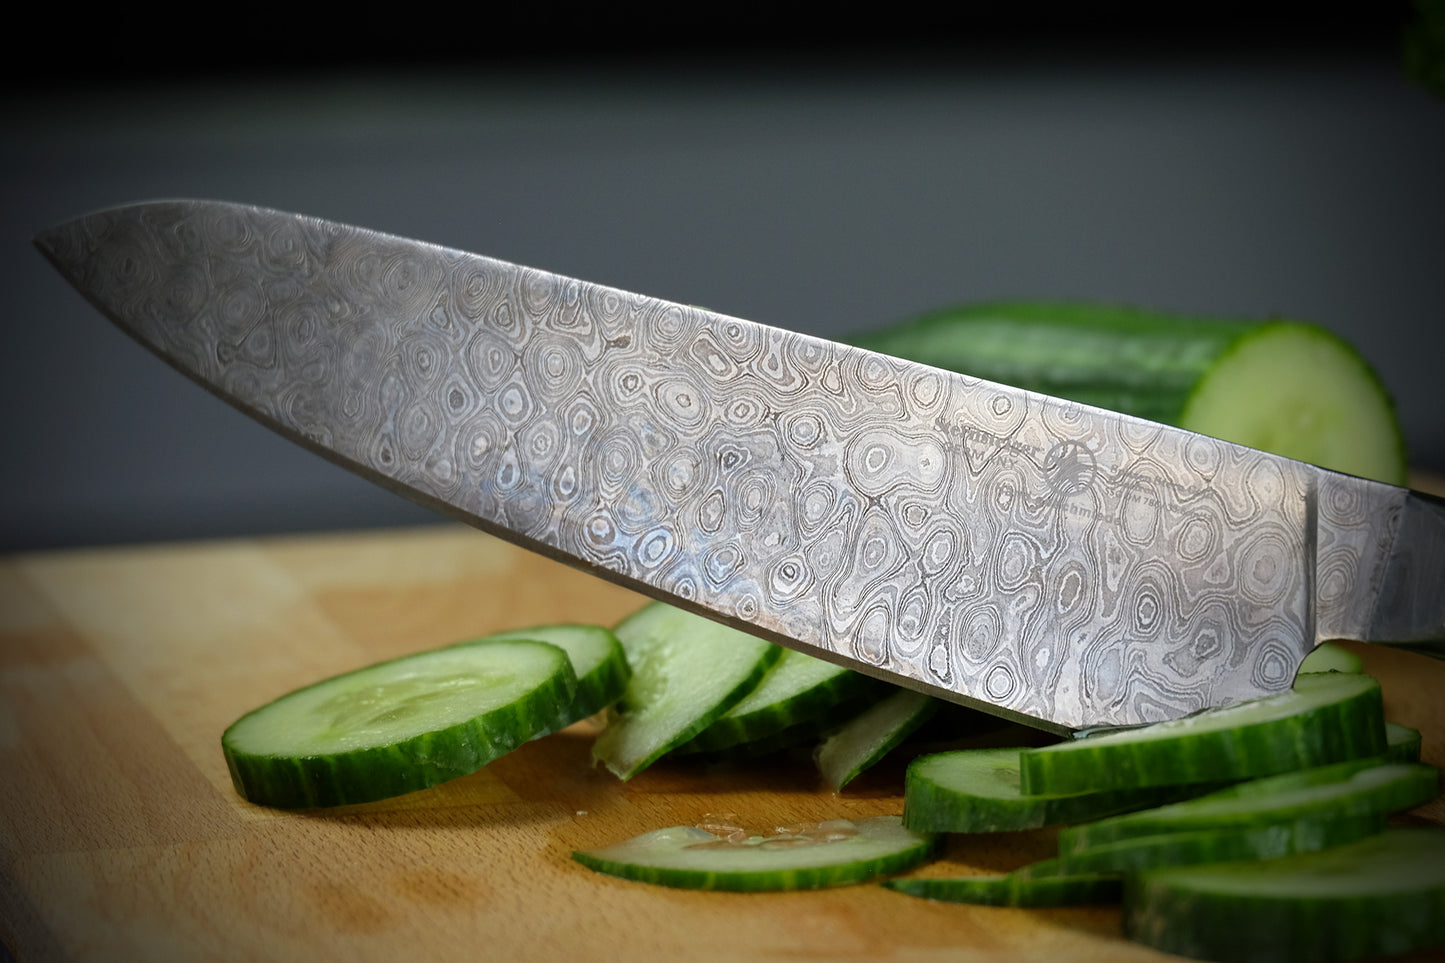 Germanicum Arminius Chef's Knife in 440 layers of damascus layers